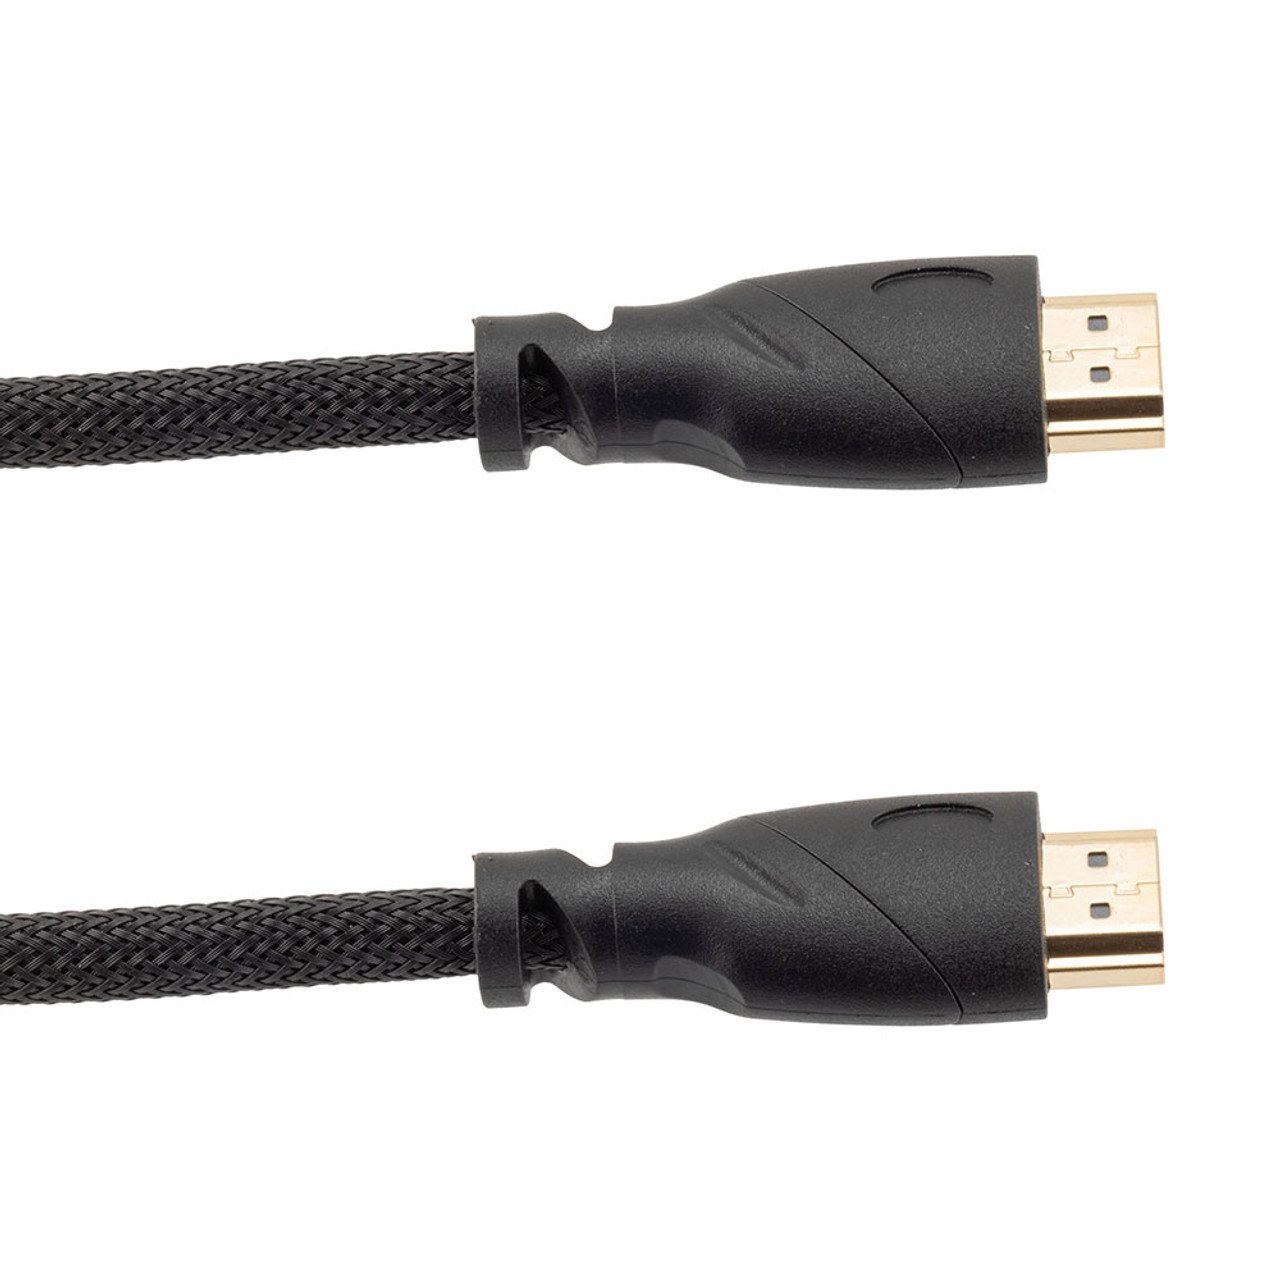 NavePoint HDMI 2.0 Male to Male Braided Cable, PVC with Nylon, Black, PVC shell, Supports 4K @ 60Hz, 2M 